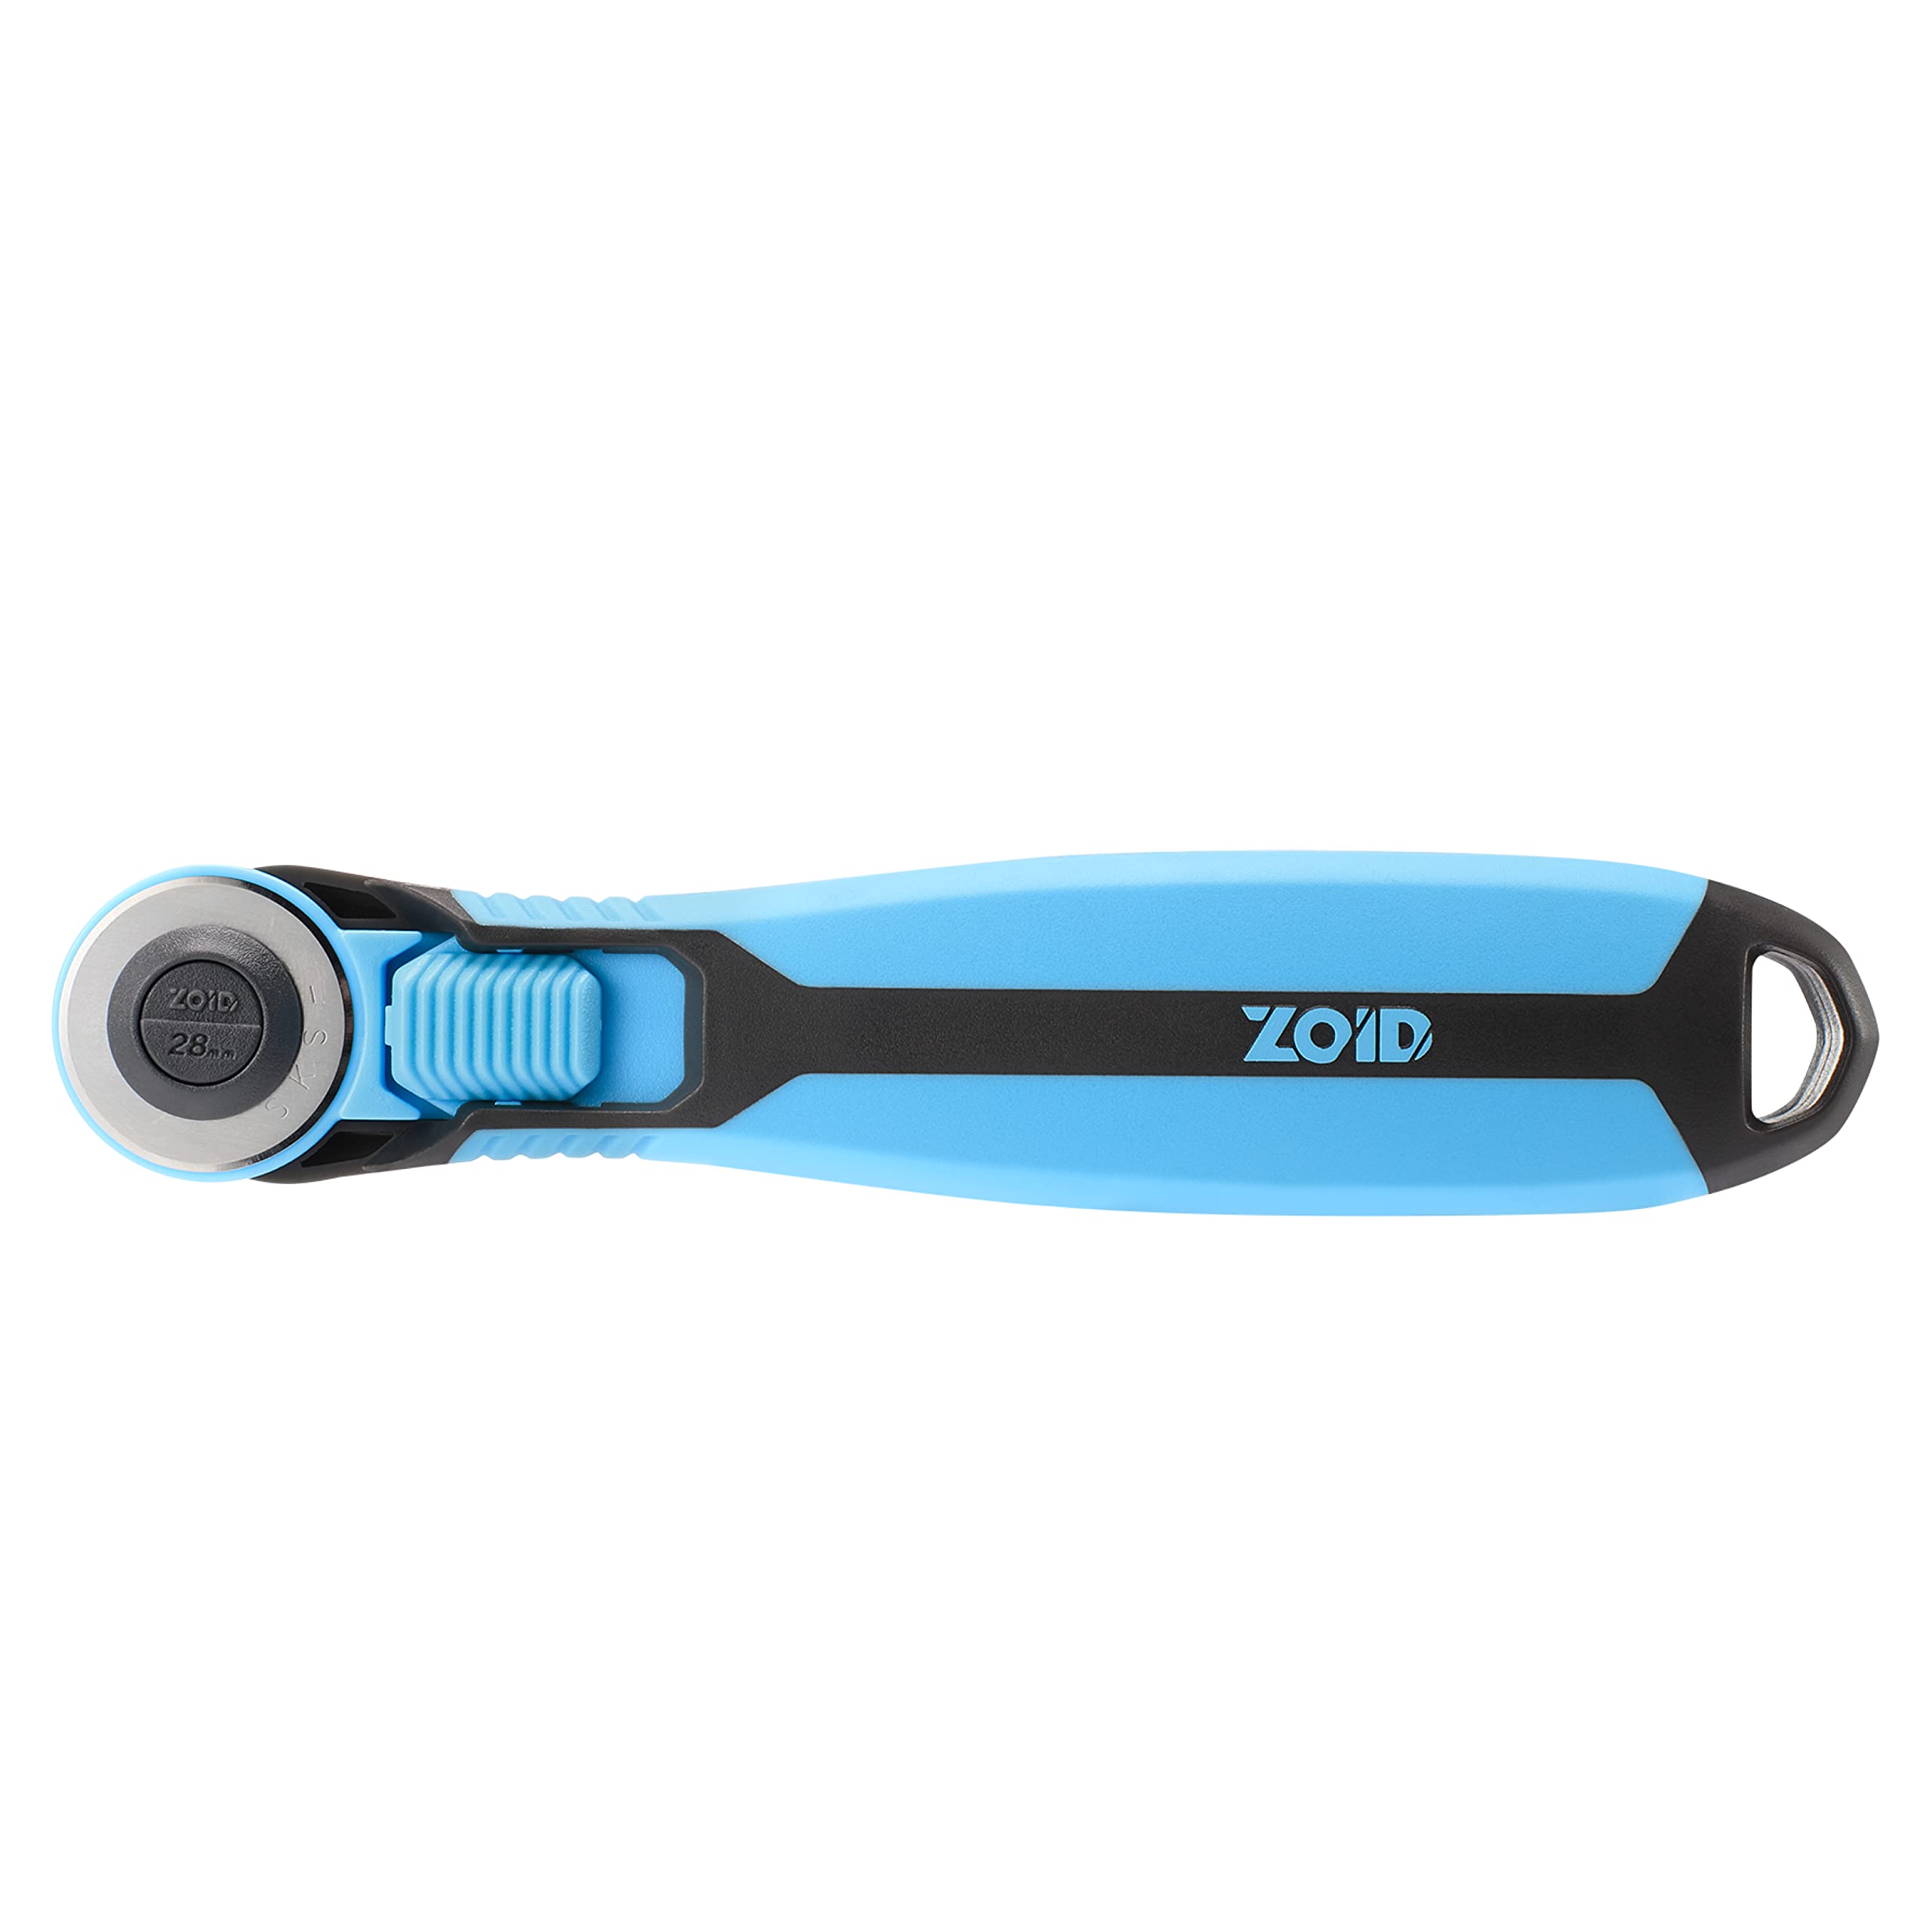 28-mm Zoid Rotary Fabric Cutter Wheel $6 + Free Shipping w/ Prime or on $35+